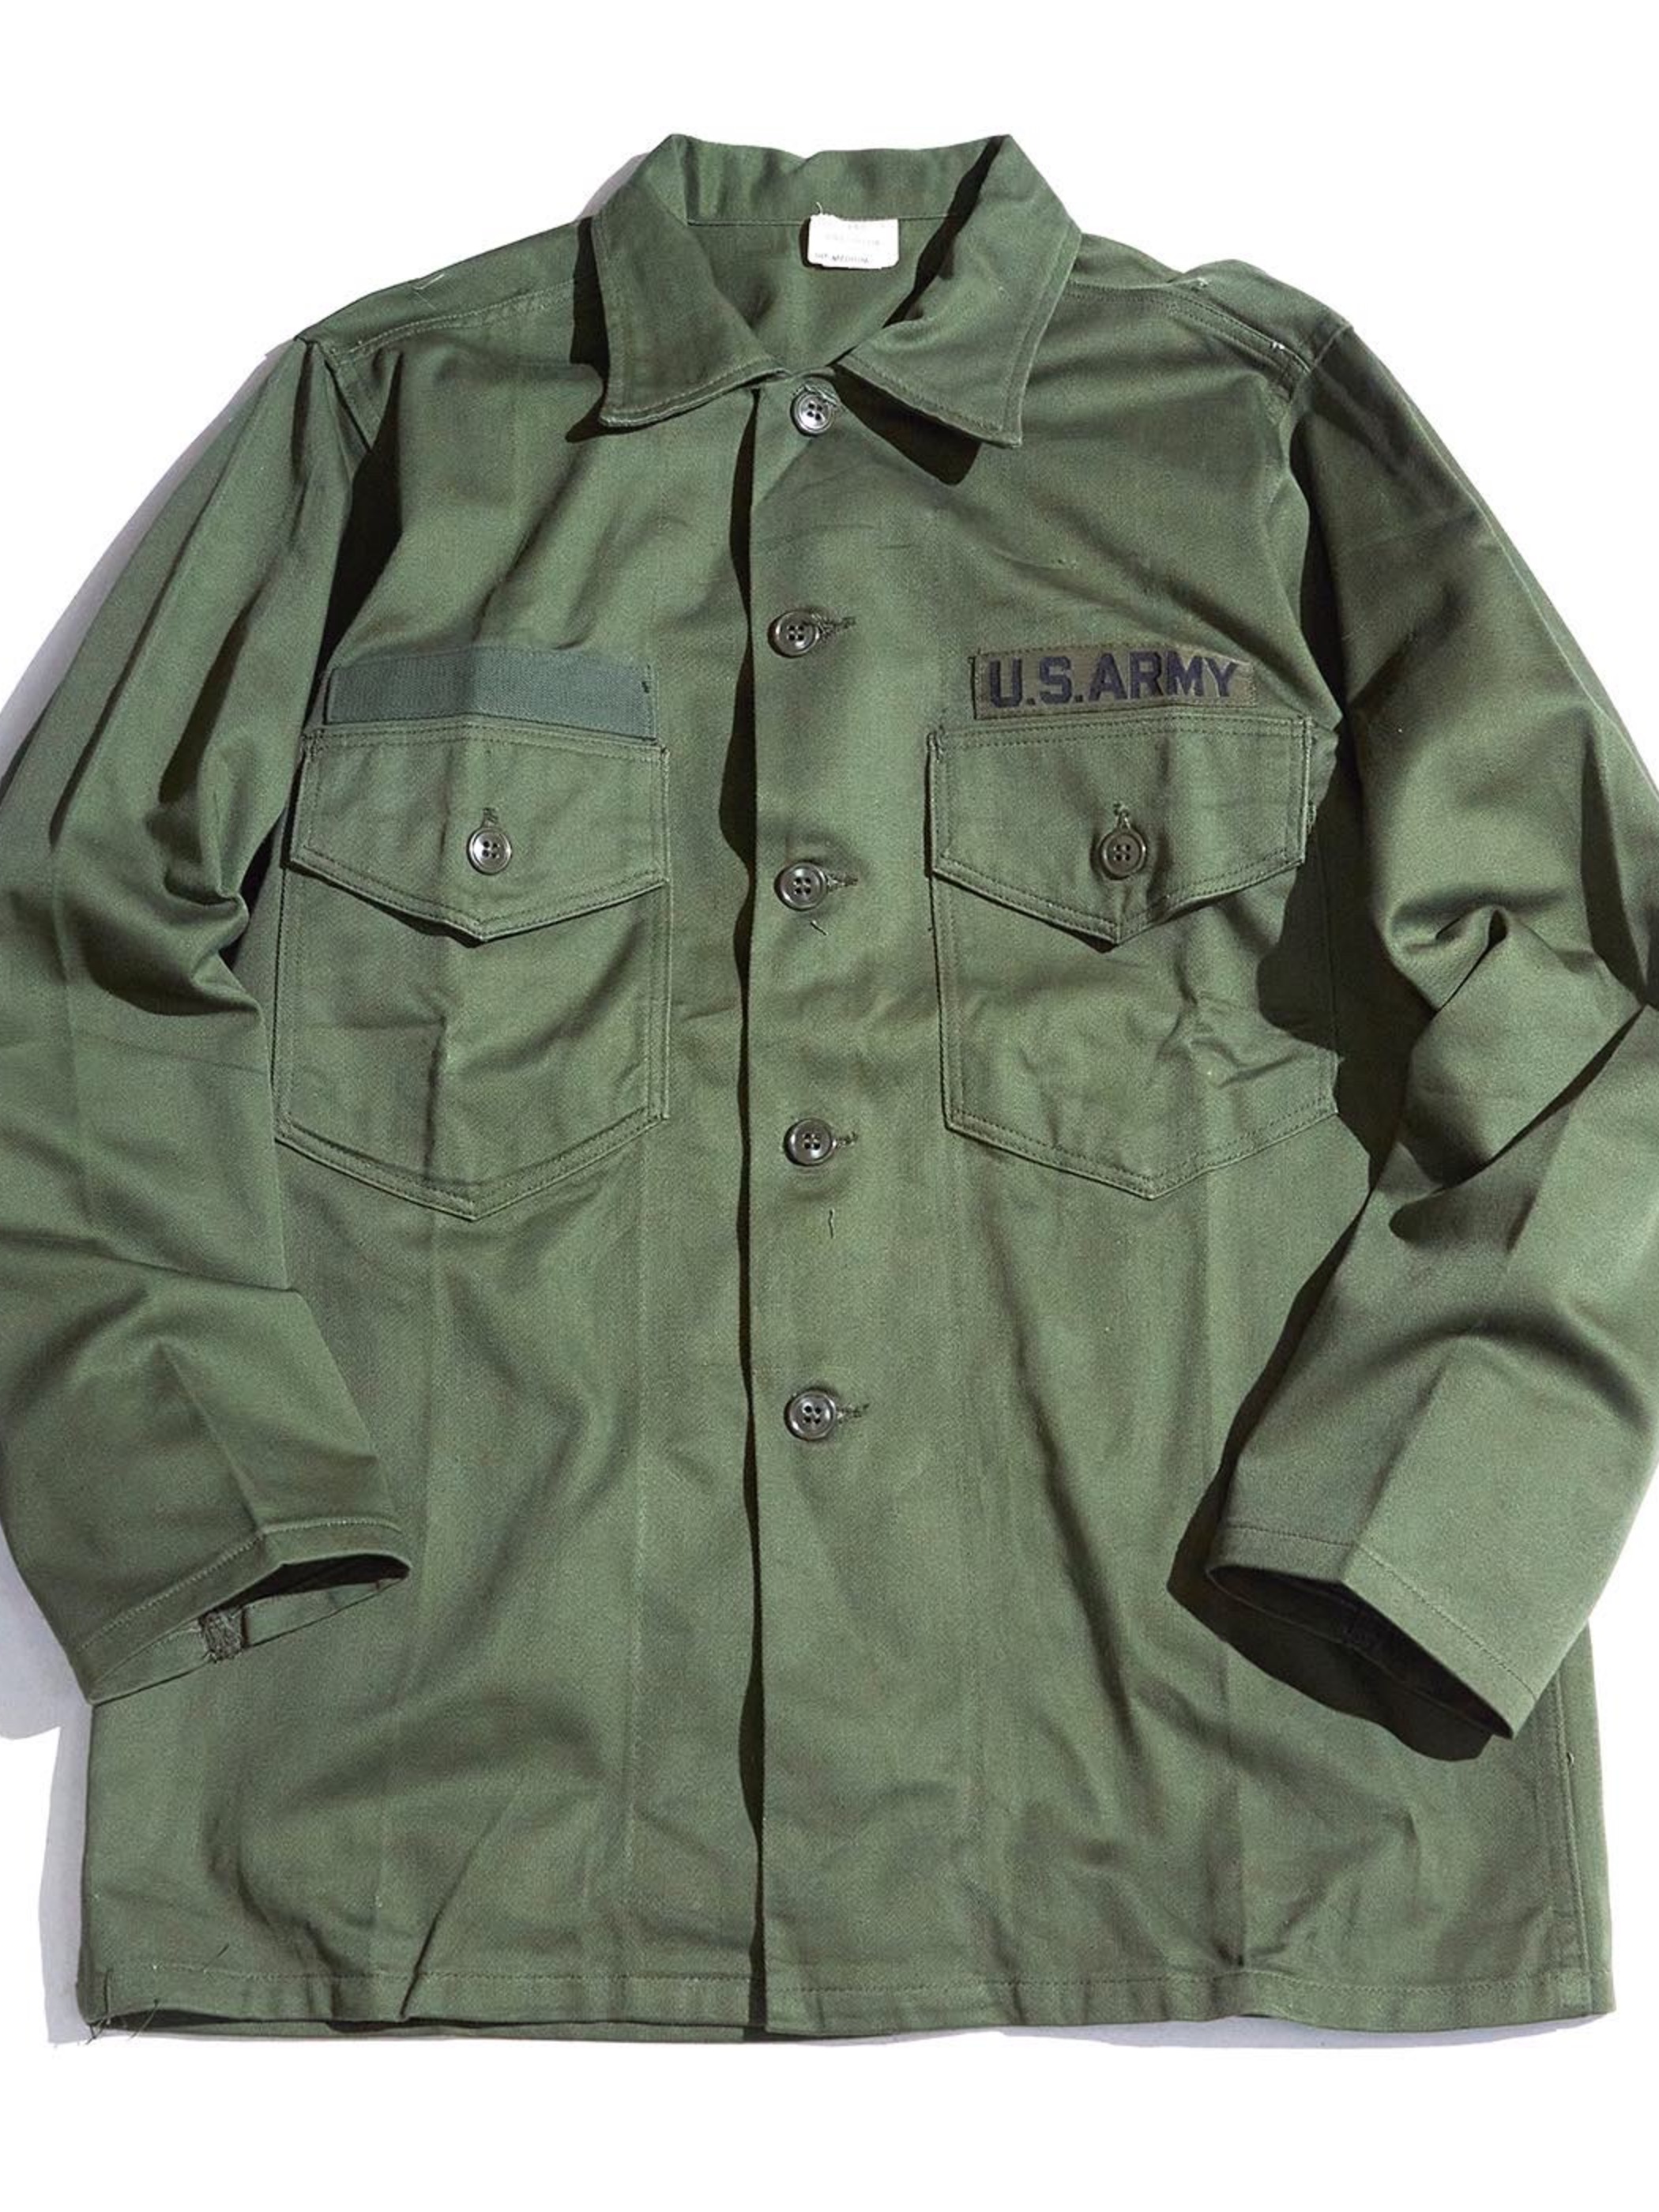 US army 50s COTTON SATEEN UTILITY SHIRT - シャツ